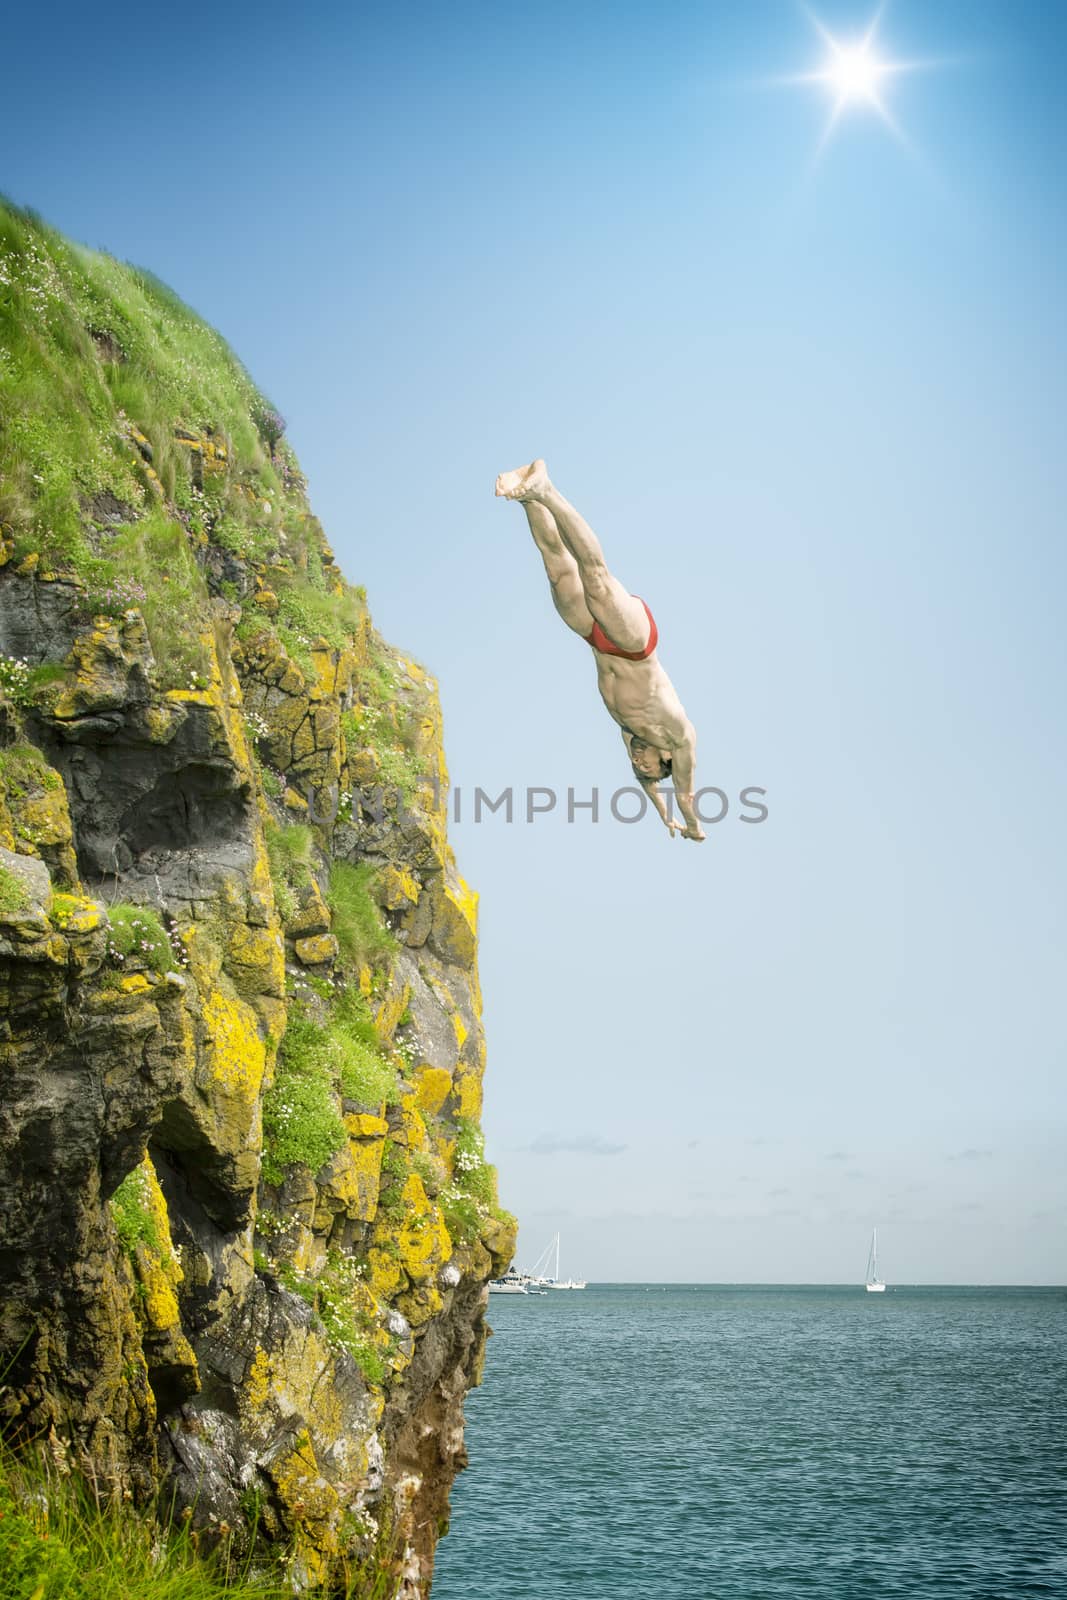 An image of a cliff jumper at the sea